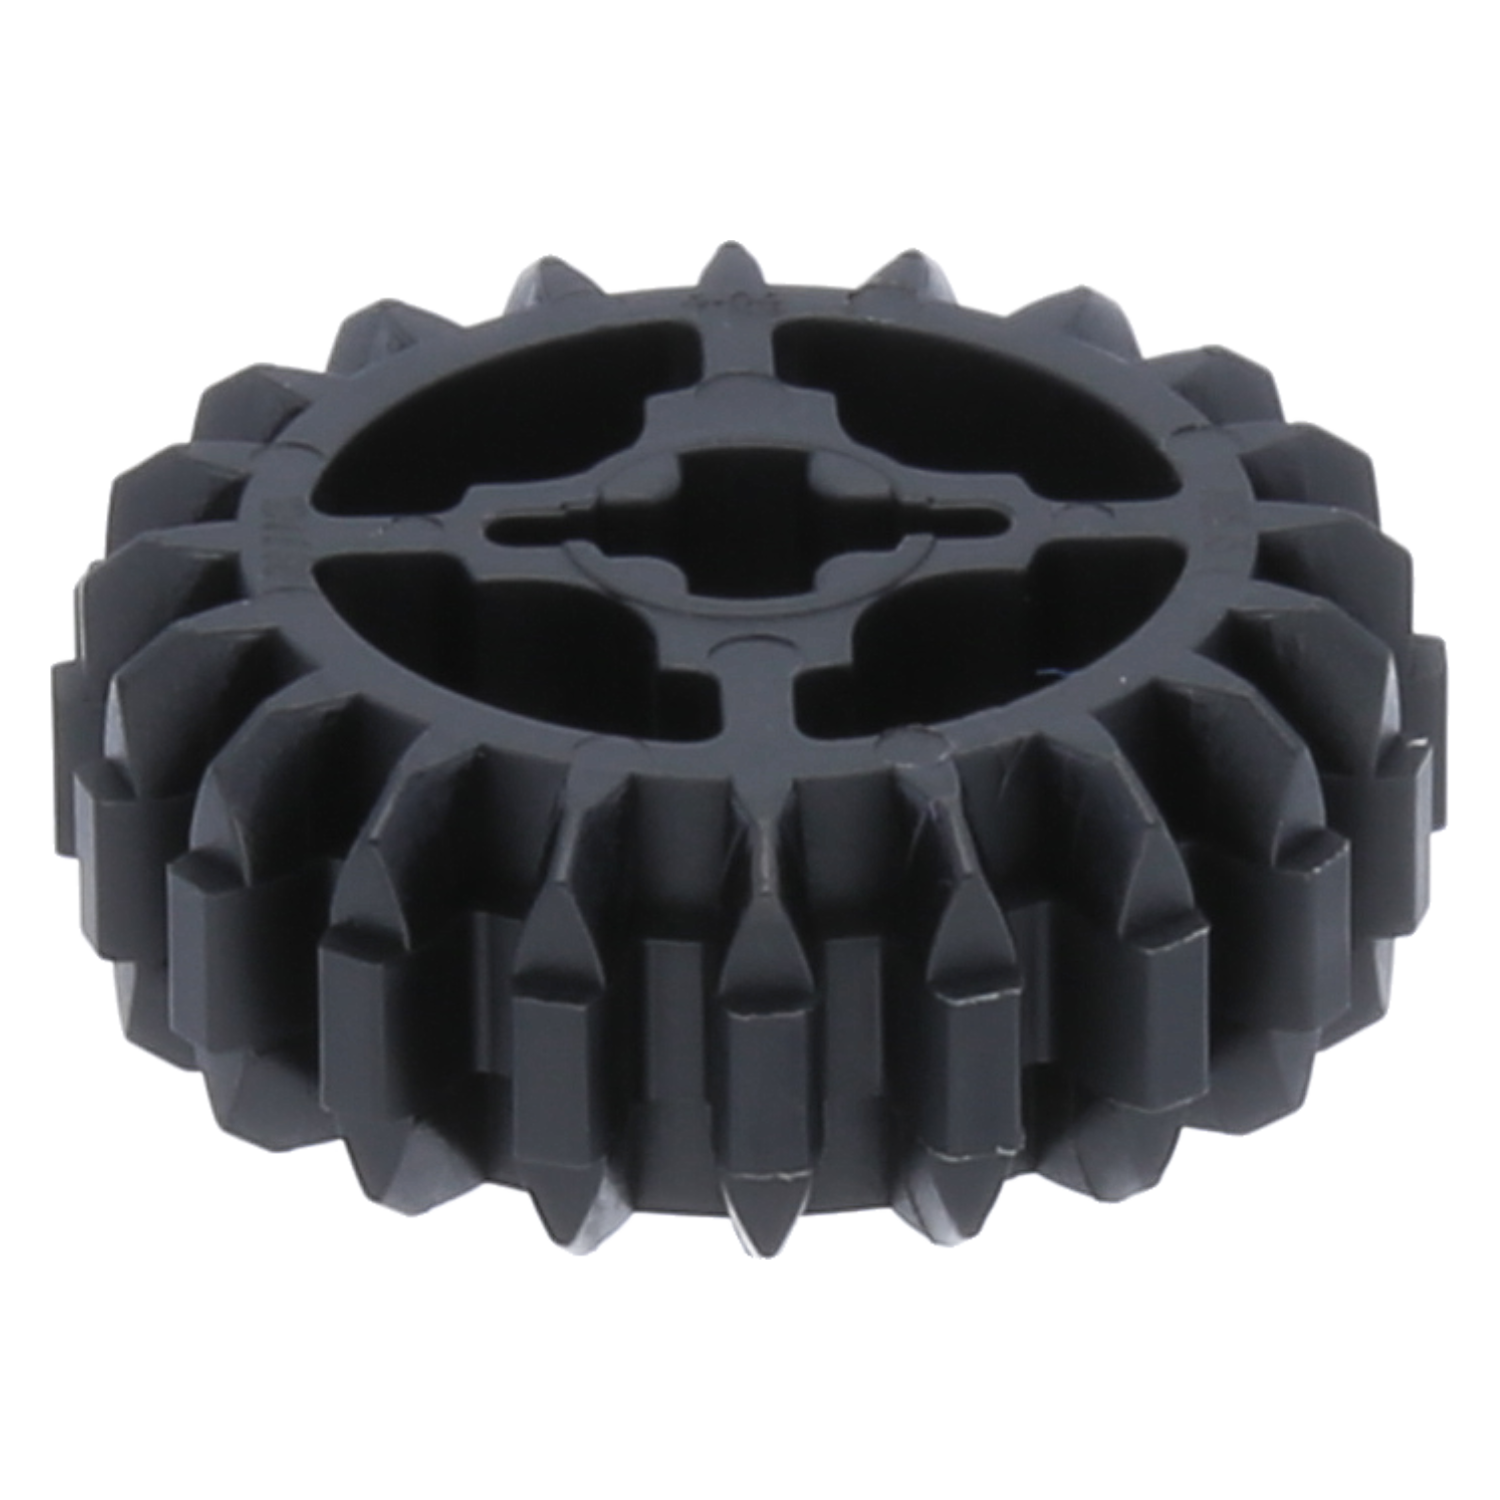 LEGO Technic gears - 20 -toothy with double chamber